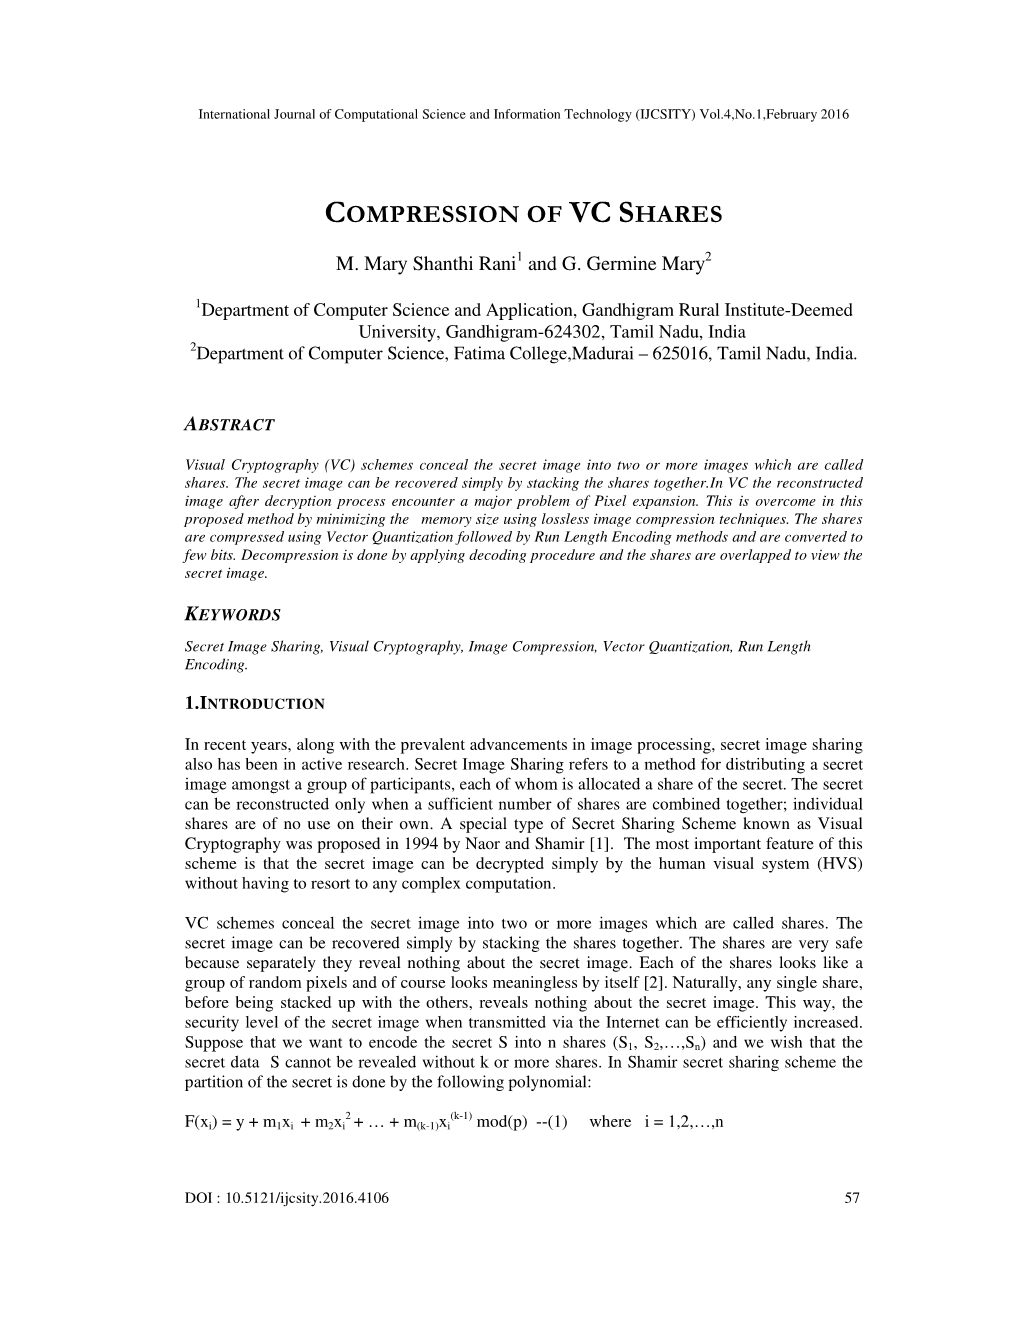 Compression of Vc Shares